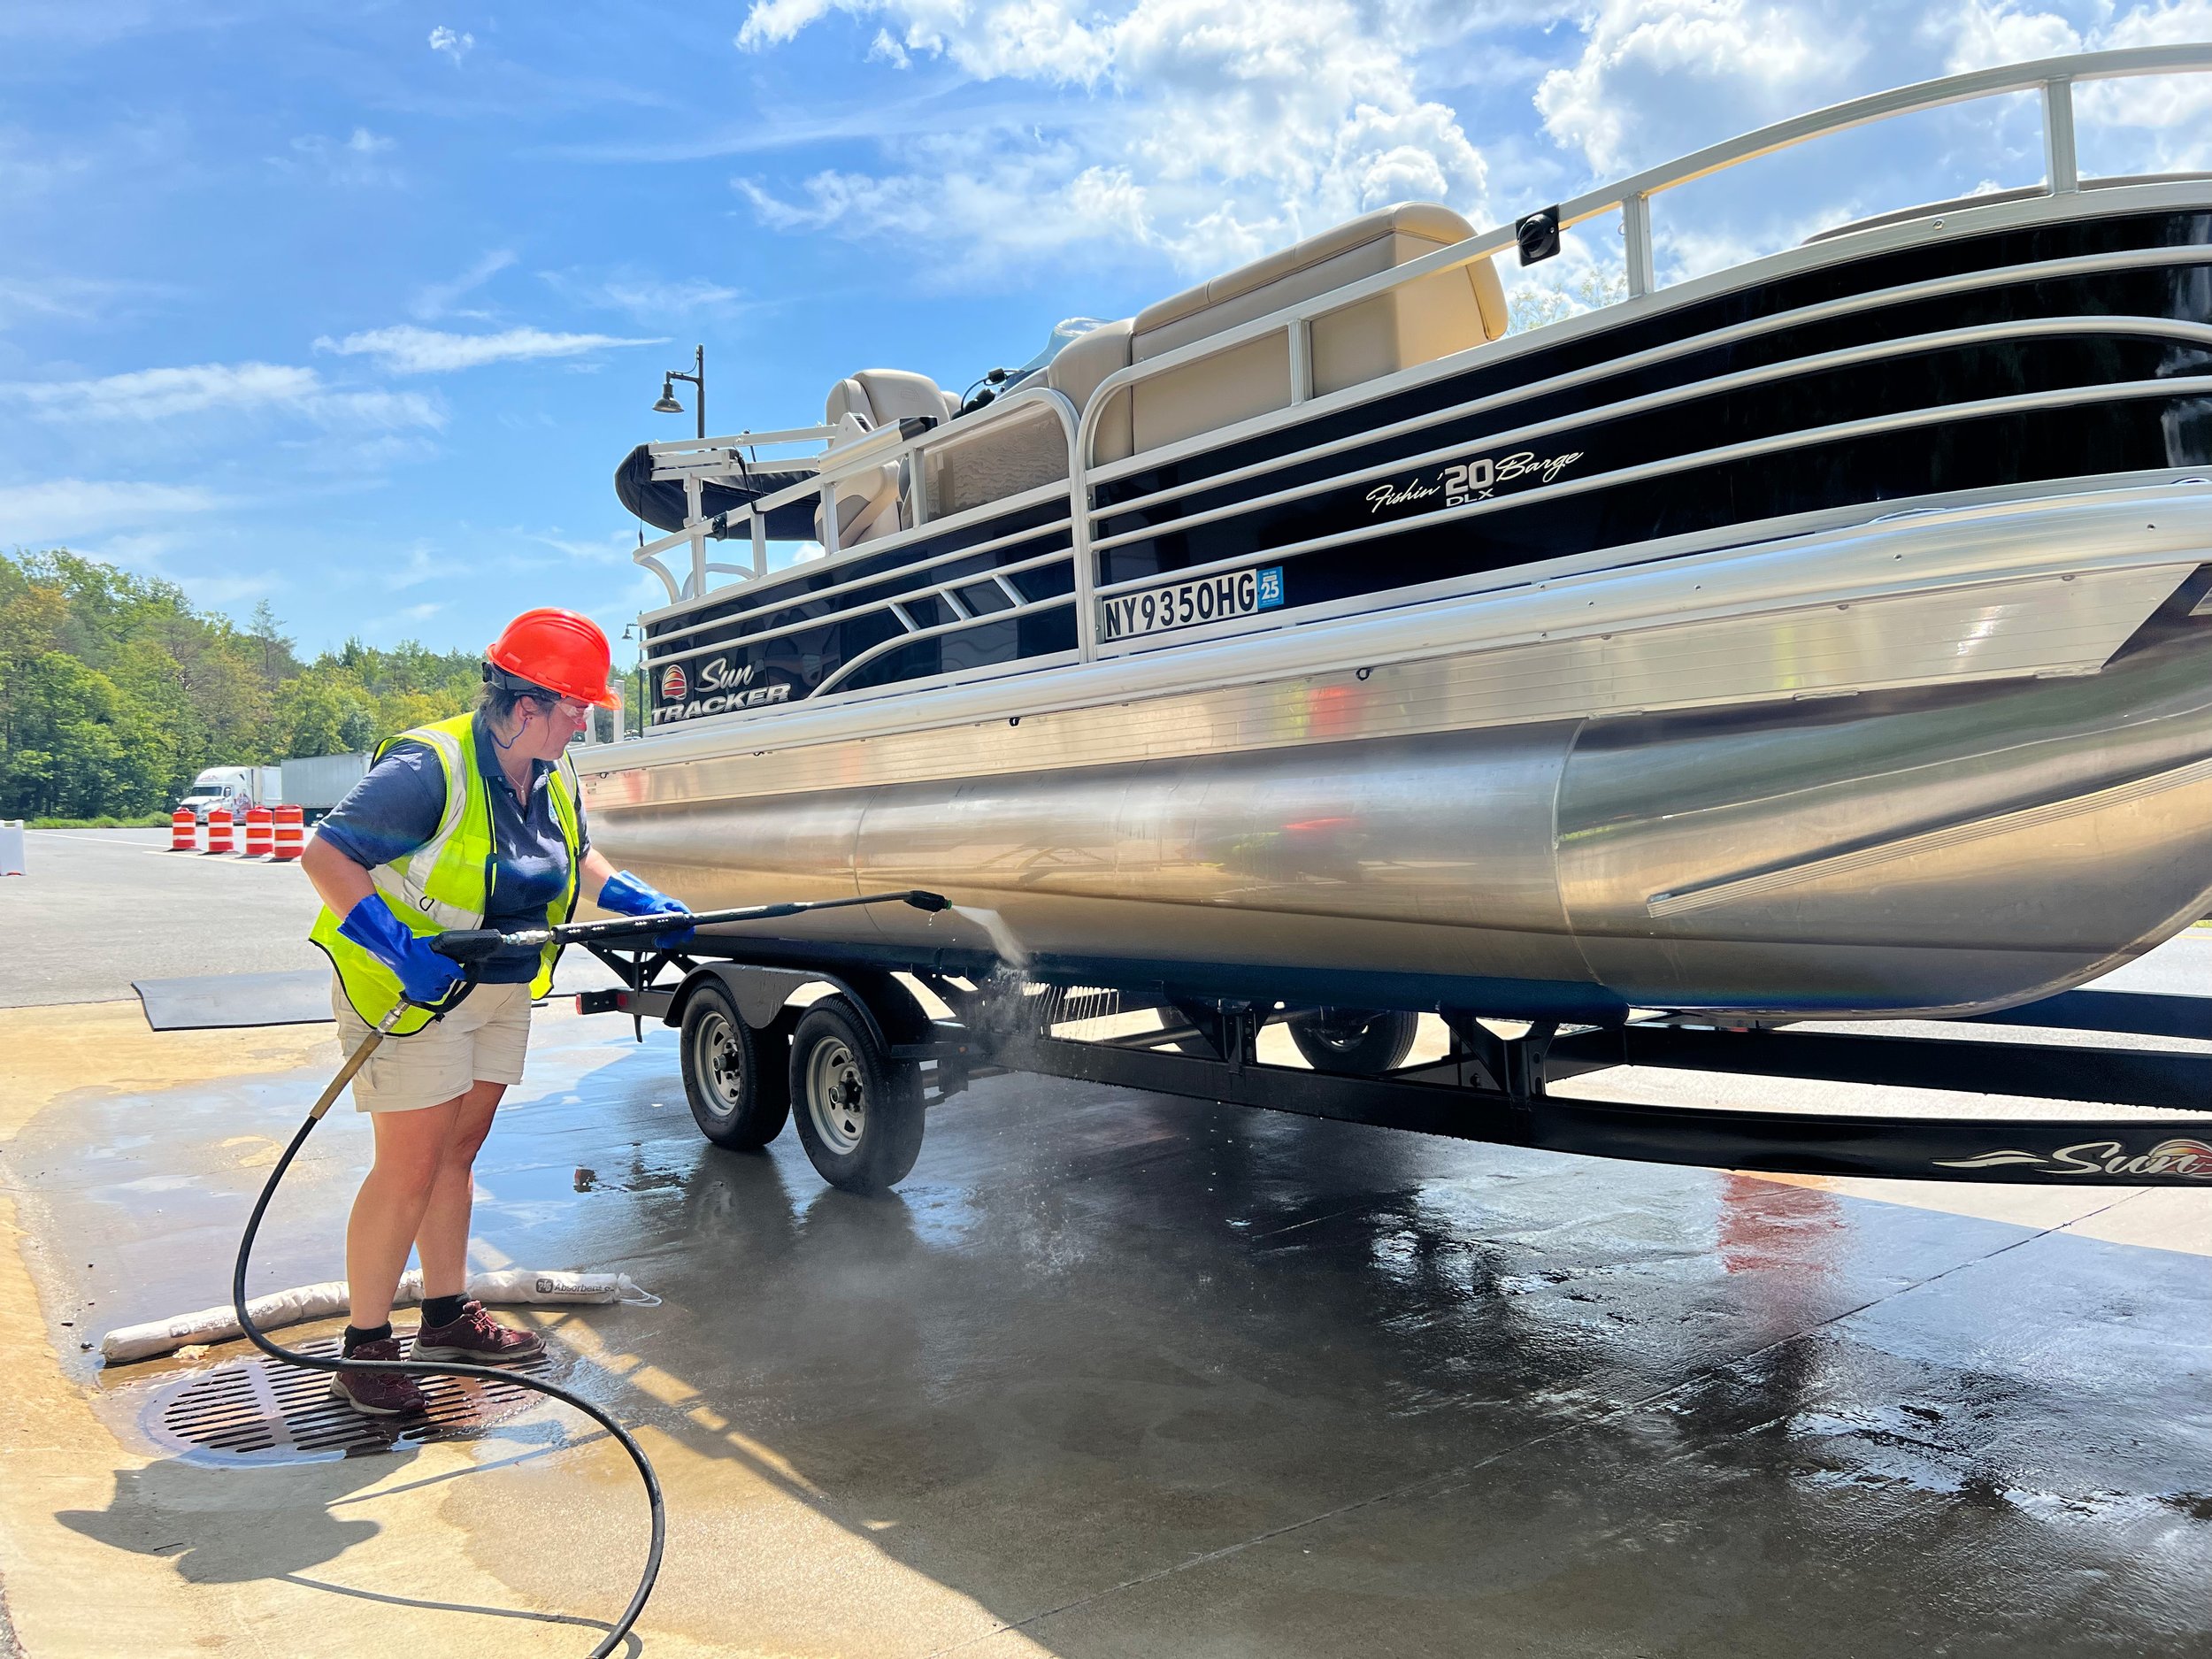  A Watercraft Inspect Stewards washes a pontoon boat. 